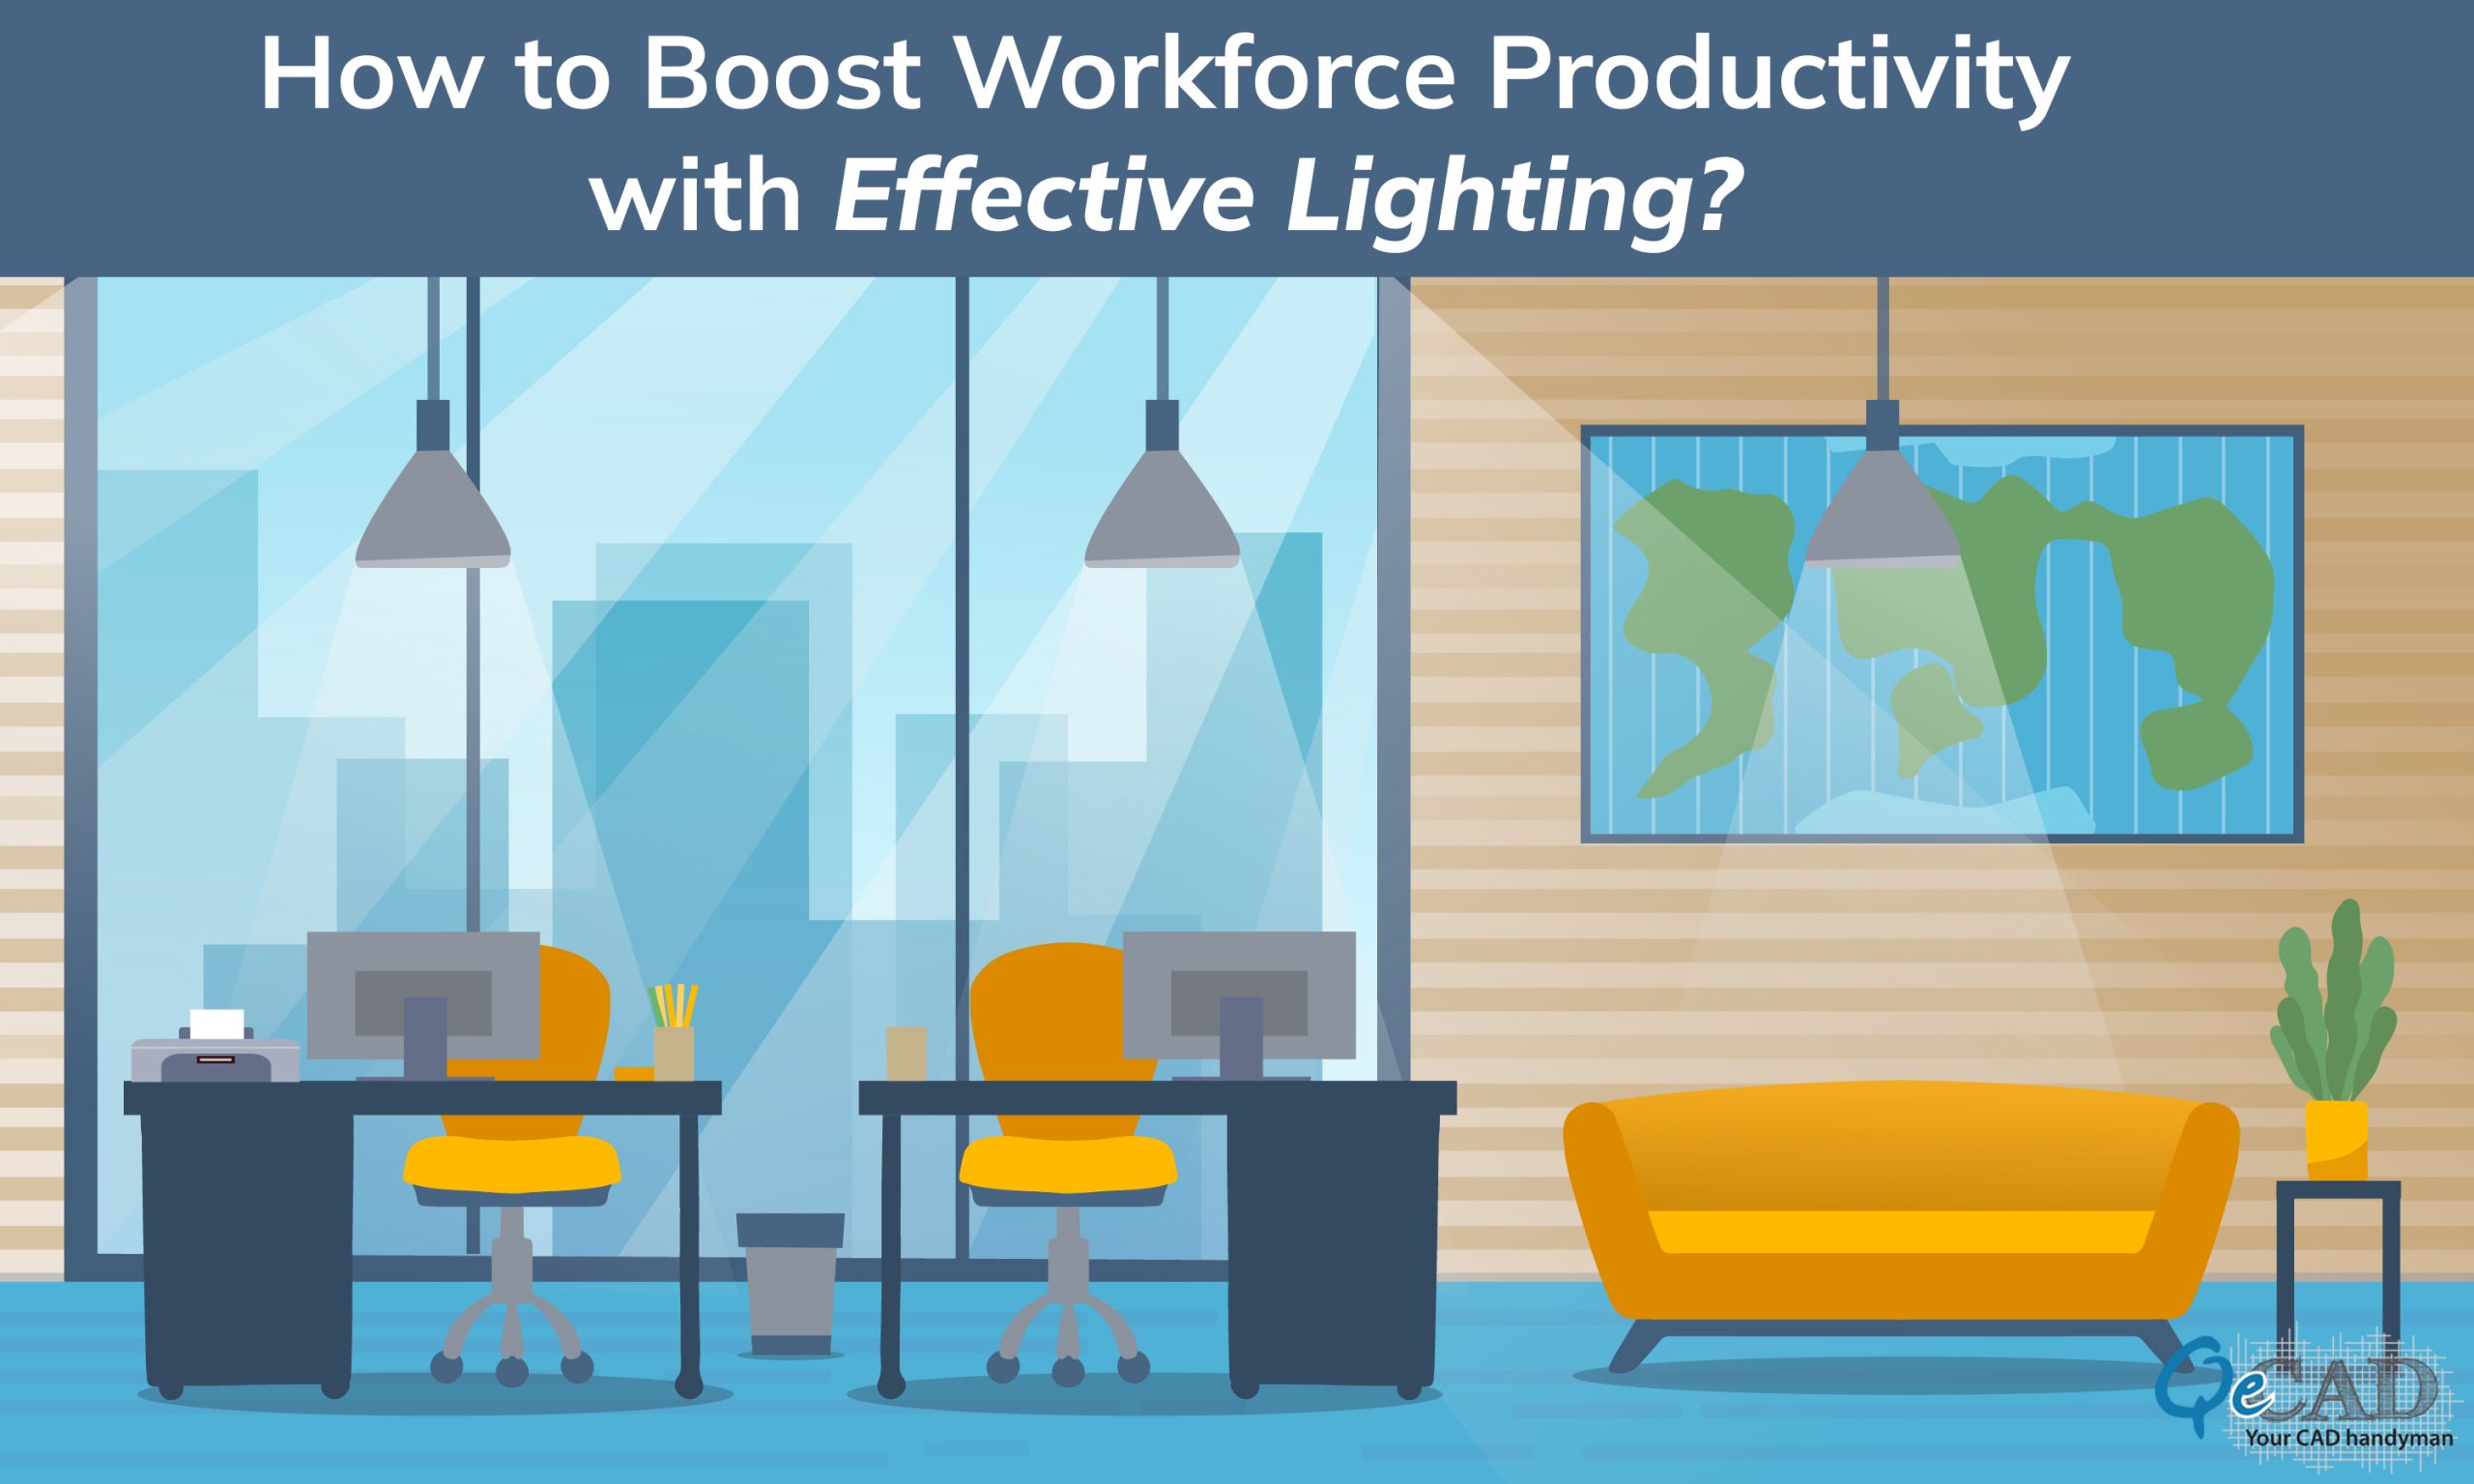 How to Boost Workforce Productivity with Effective Lighting?